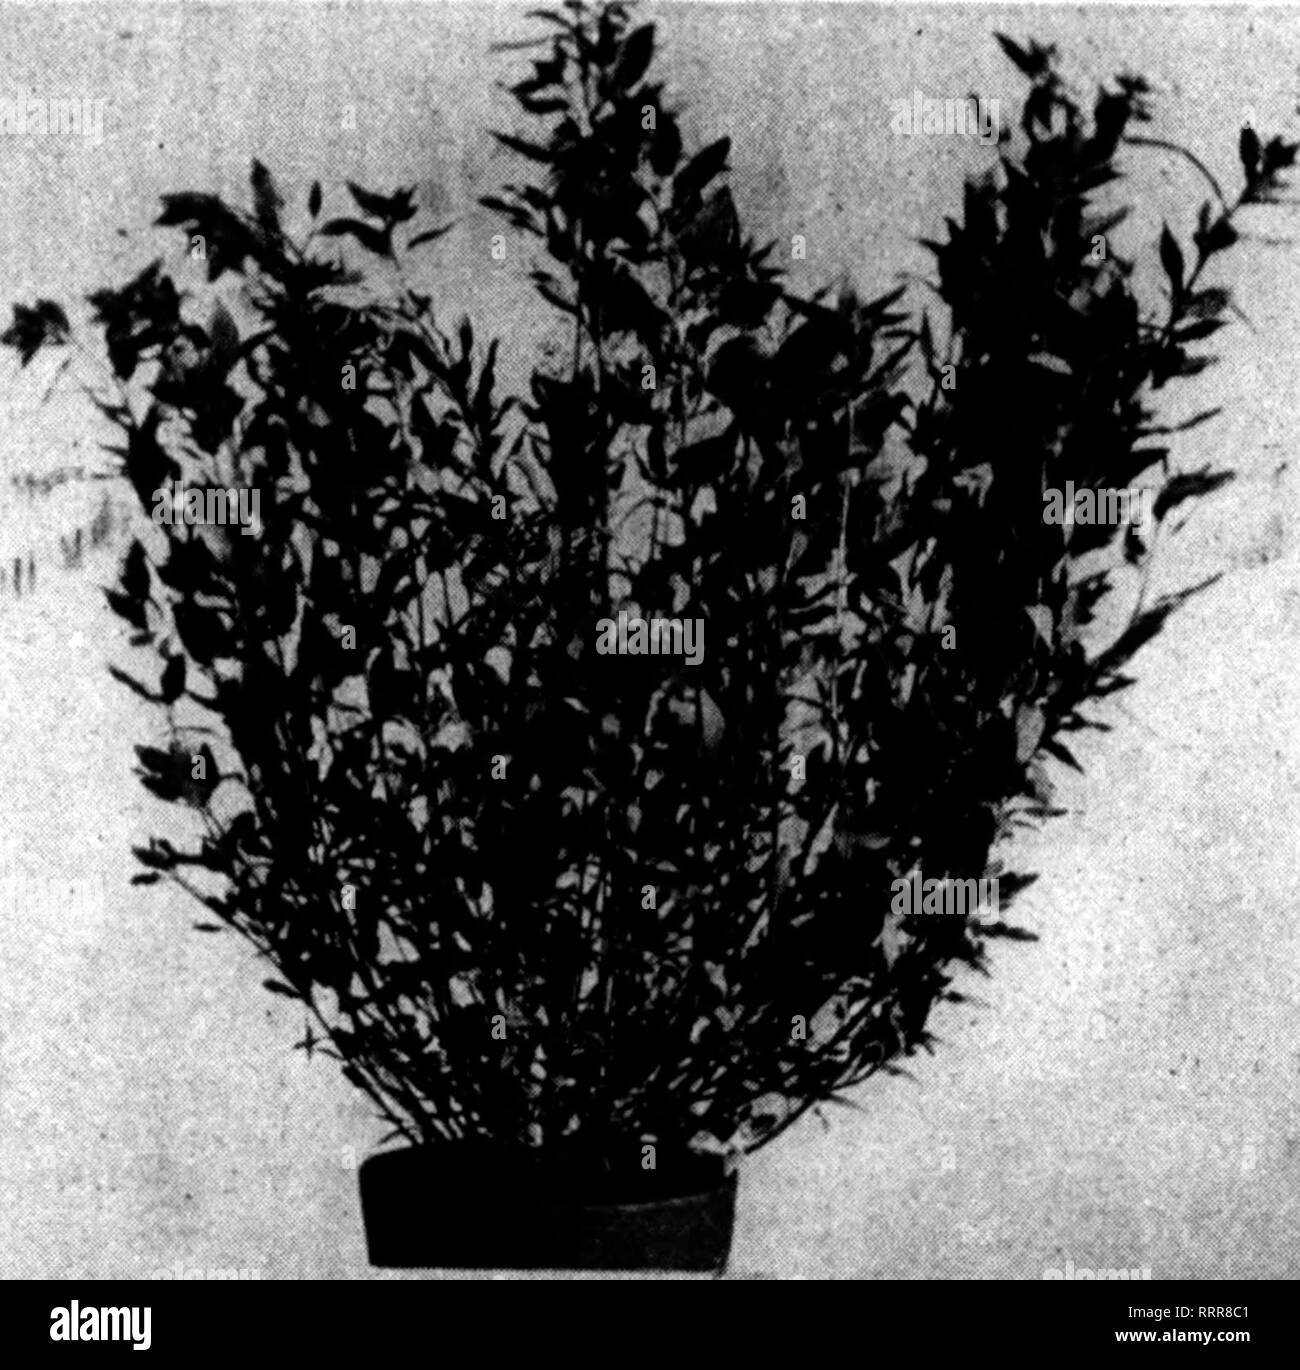 . Florists' review [microform]. Floriculture. 102 The Florists'Review Mabch 25, 1915.. S.f.a»m4llma. S«ad Sown Jon* 17, First BloasoiH Dw. Photo Fob. 10. loside or Outside No matter where you grow seedling plants of my Silver Pink Snapdragon the same good results obtain. Right now Is the time to, sow seed for your stock of plants for bedding out. Whether yon ?irant it for show or profit there Is no snapdragon that will equal it. It Is not a mite dwarf and you can cut salable blossoms by the armful all summer, from frost to frost. Buffalo, N. T., Feb, 25, 1915. G. S. Ramsburg. Dear Sir: Please  Stock Photo